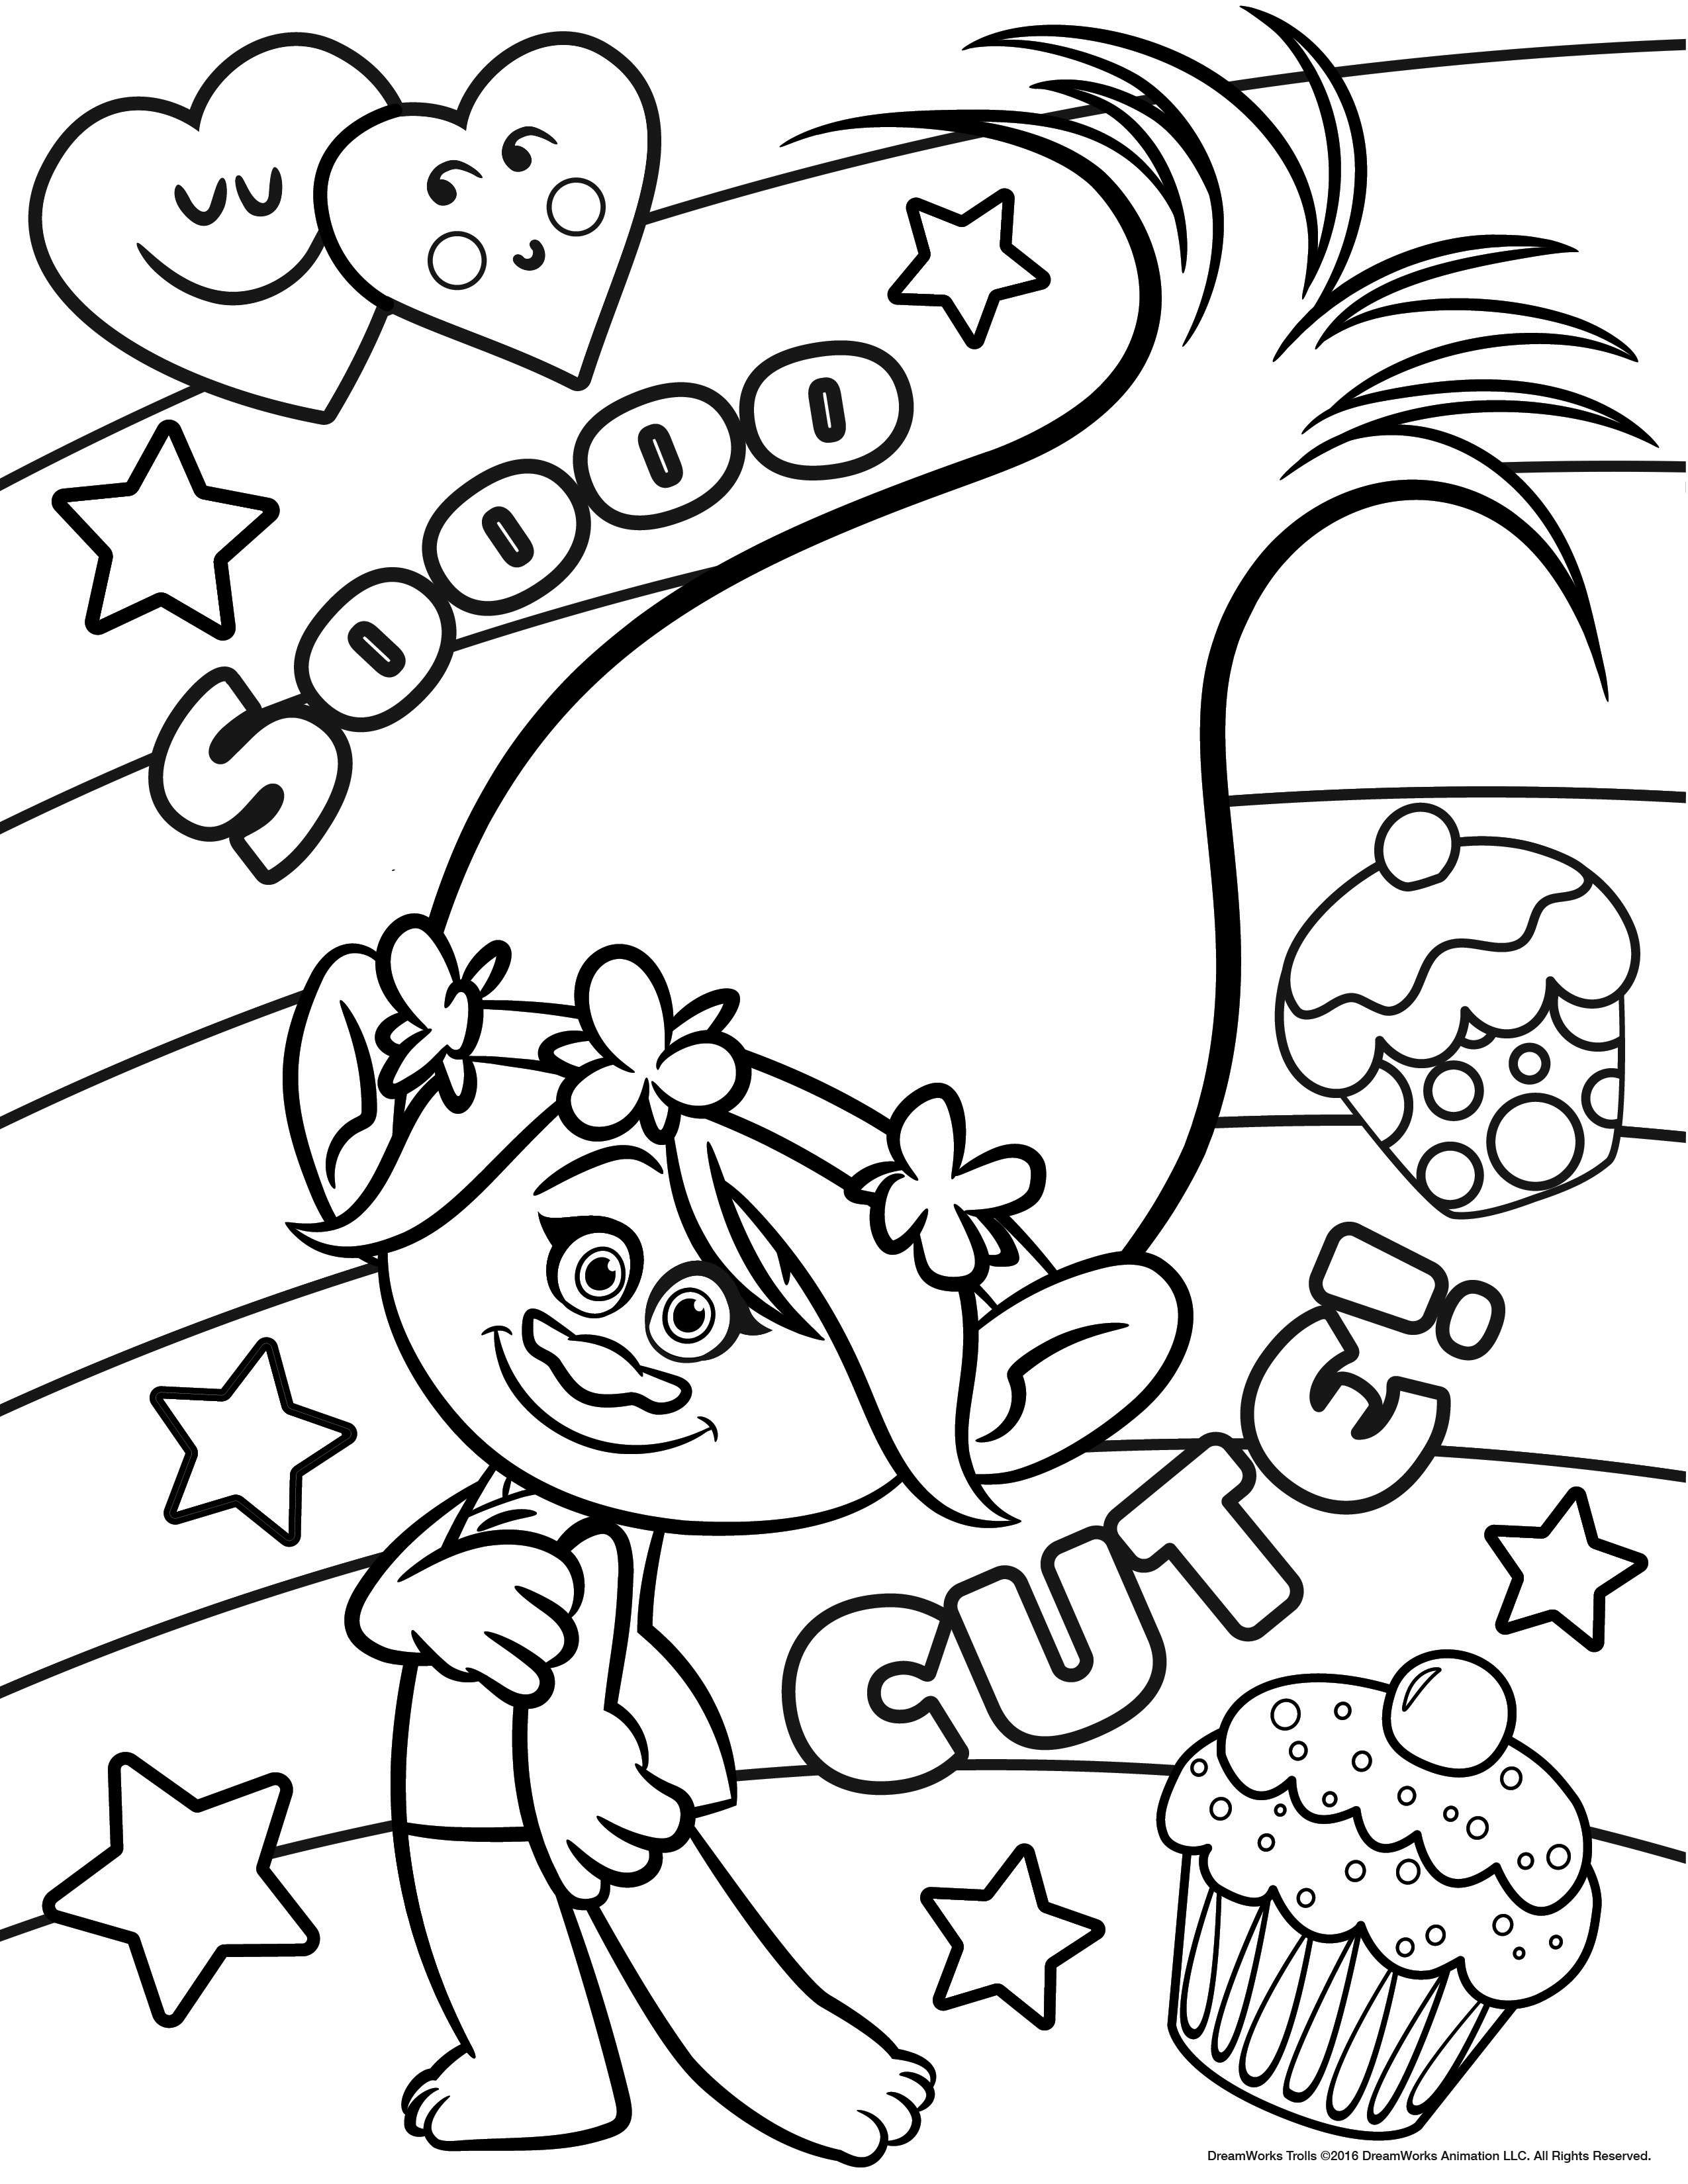 Poppy So Cute Trolls Kids Coloring Pages